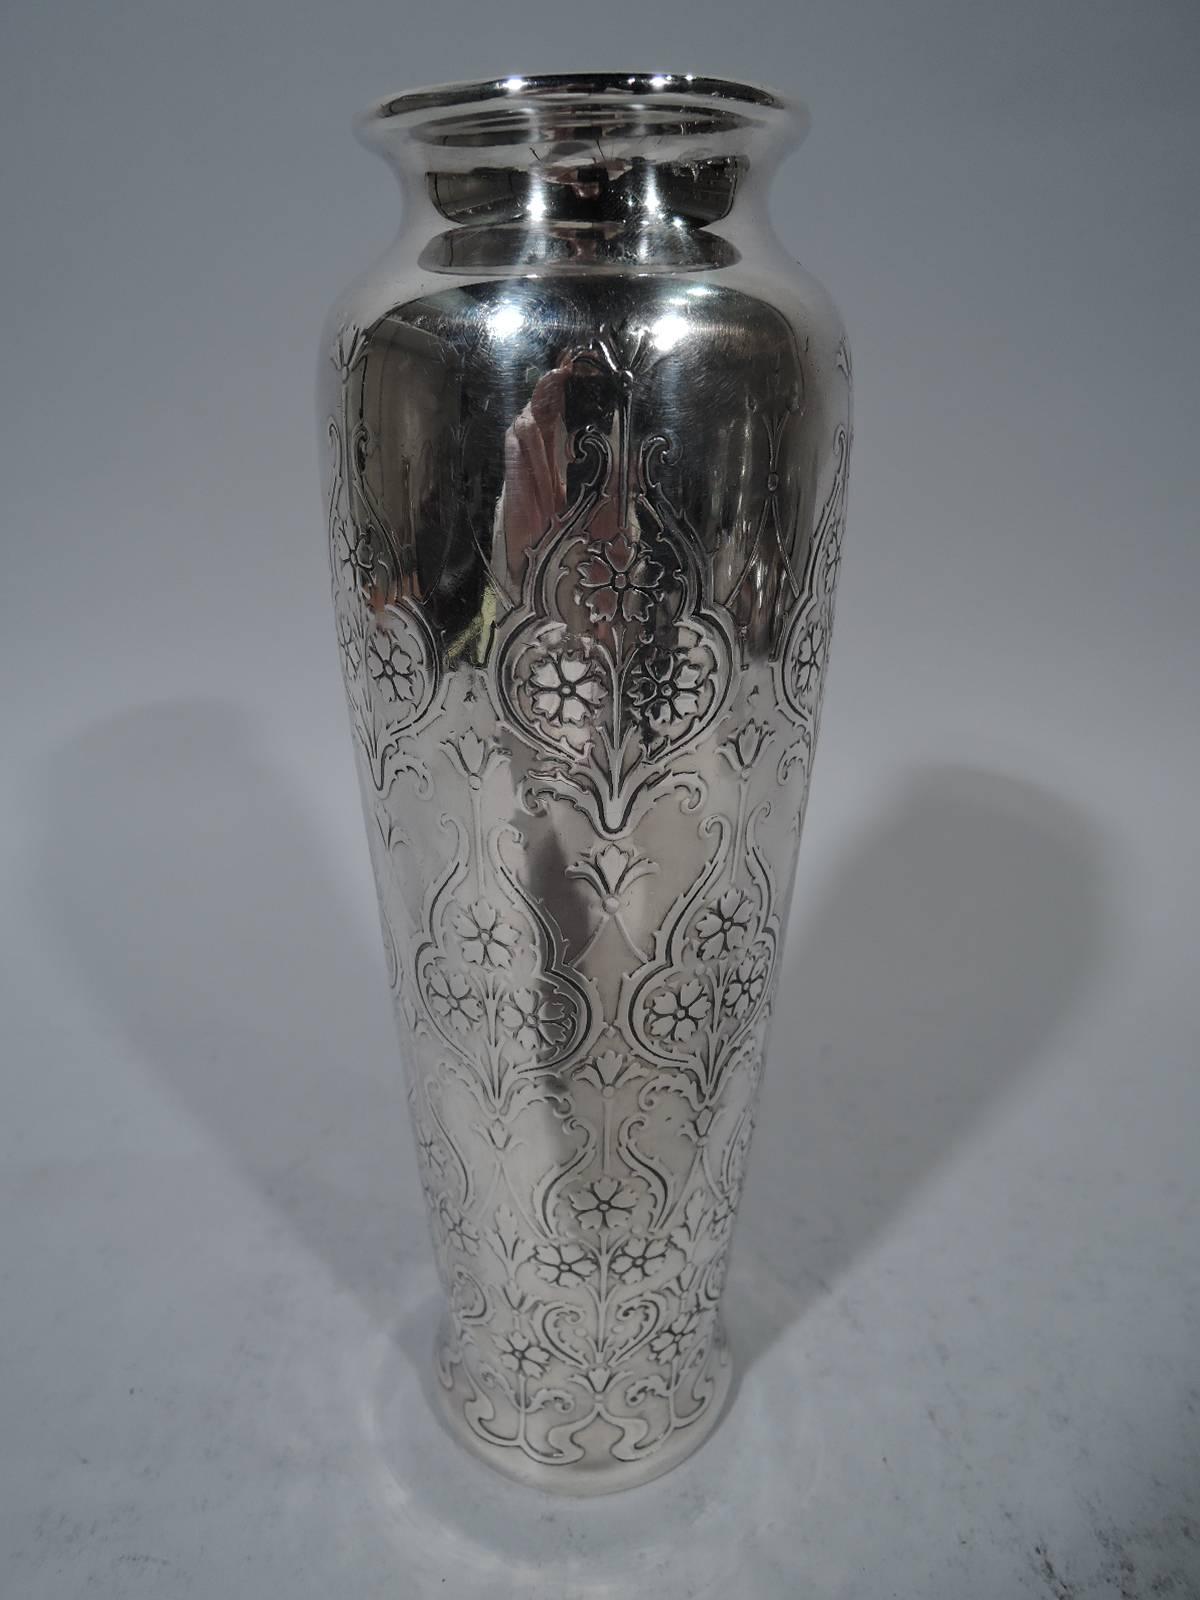 Art Nouveau sterling silver vase. Made by Tiffany & Co. in New York, circa 1911. Tapering sides with inset neck. Acid-etched repeating pattern with trefoils inset with flowers. Hallmark includes pattern no. 18097B (first produced in 1911) and